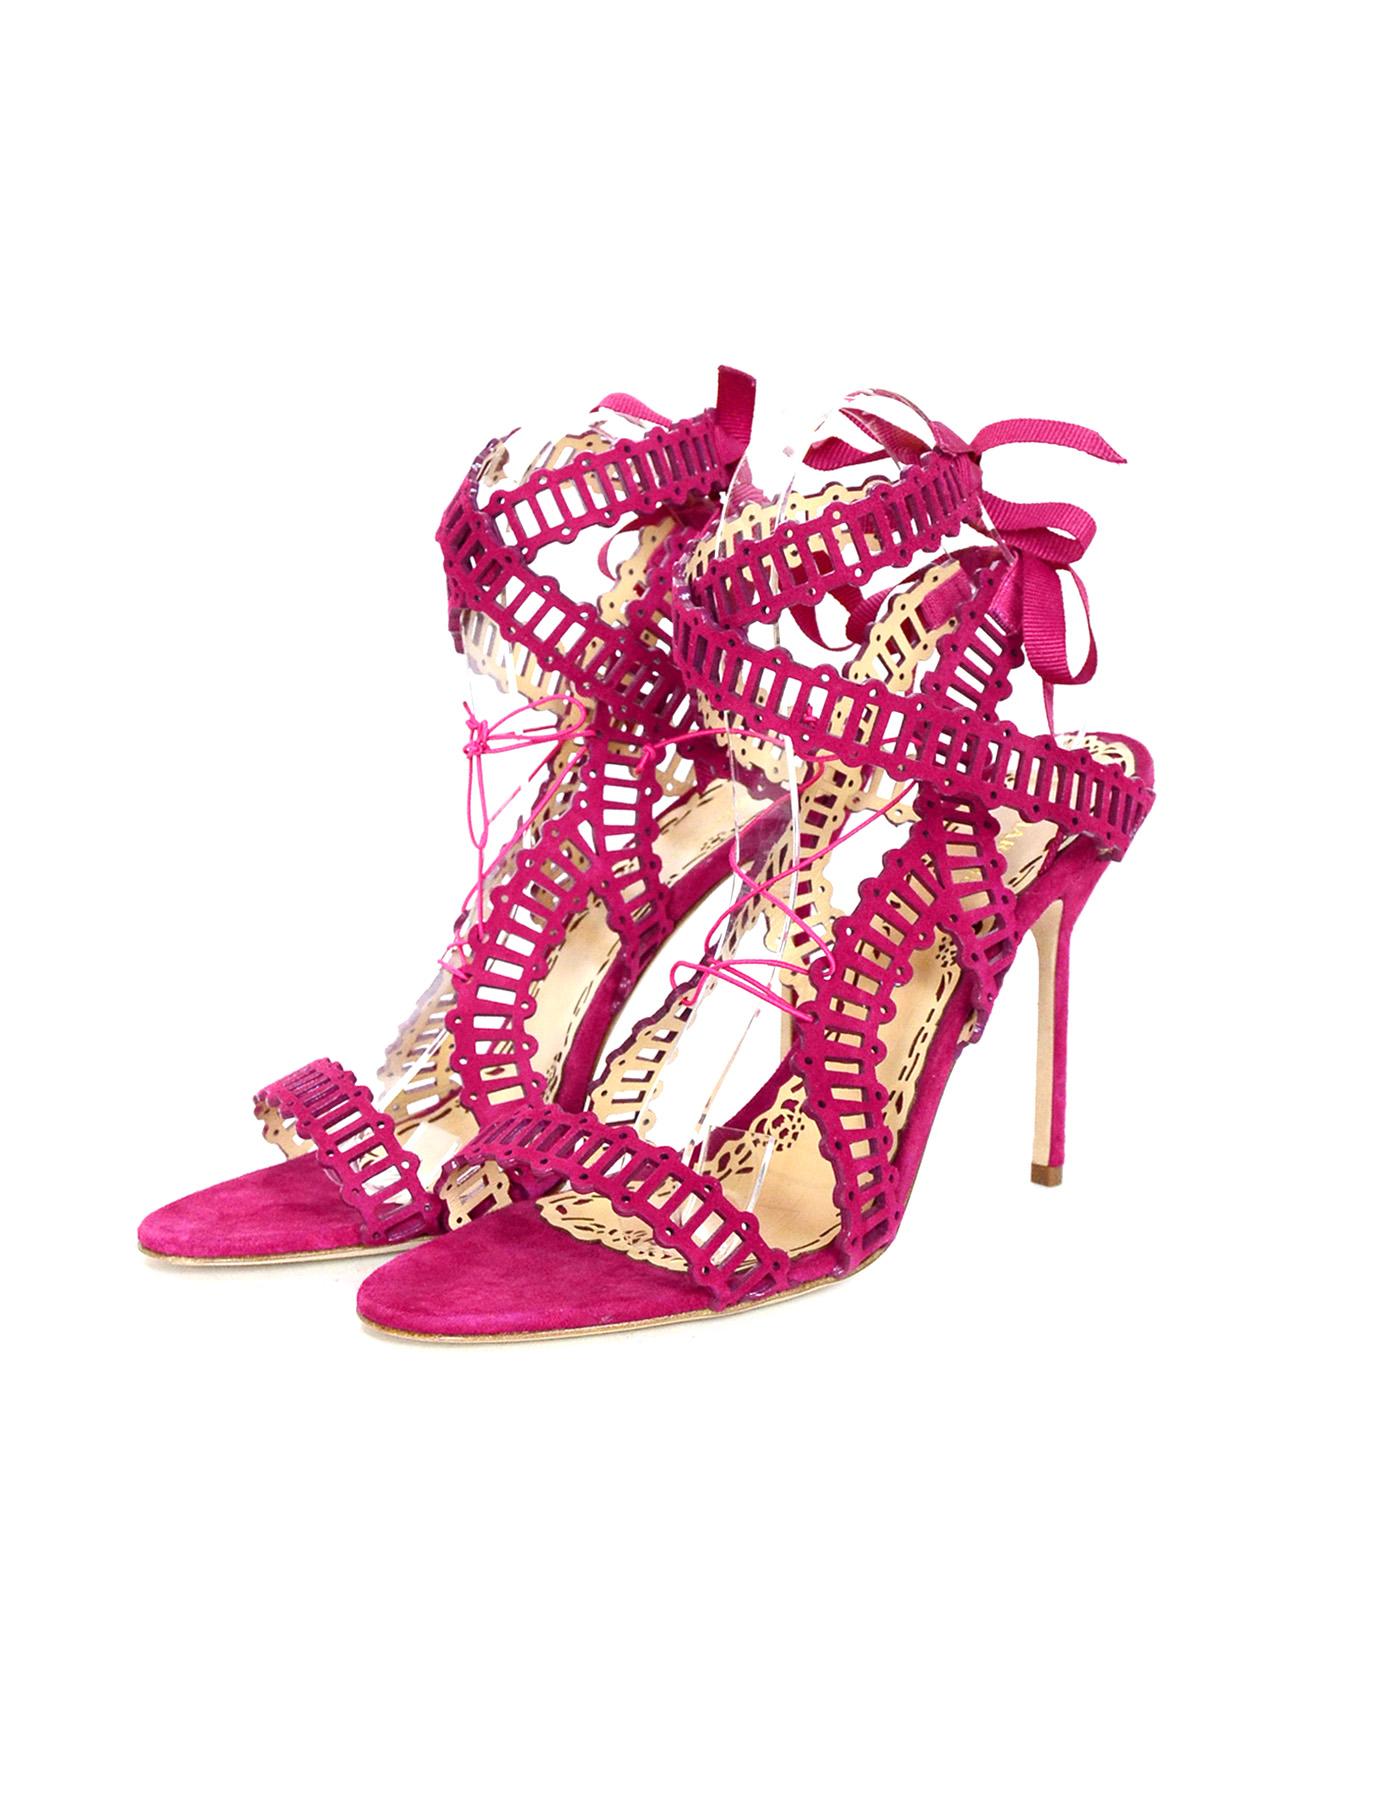 Marchesa NEW Hot Pink Suede Cut Out Stella Sandals Heels Sz 38.5

Made In: Italy
Year of Production: 2016
Color: Hot pink
Materials: Leather, suede
Closure/Opening:  Slide on and lace up front
Overall Condition: Like new condition 
Estimated Retail: